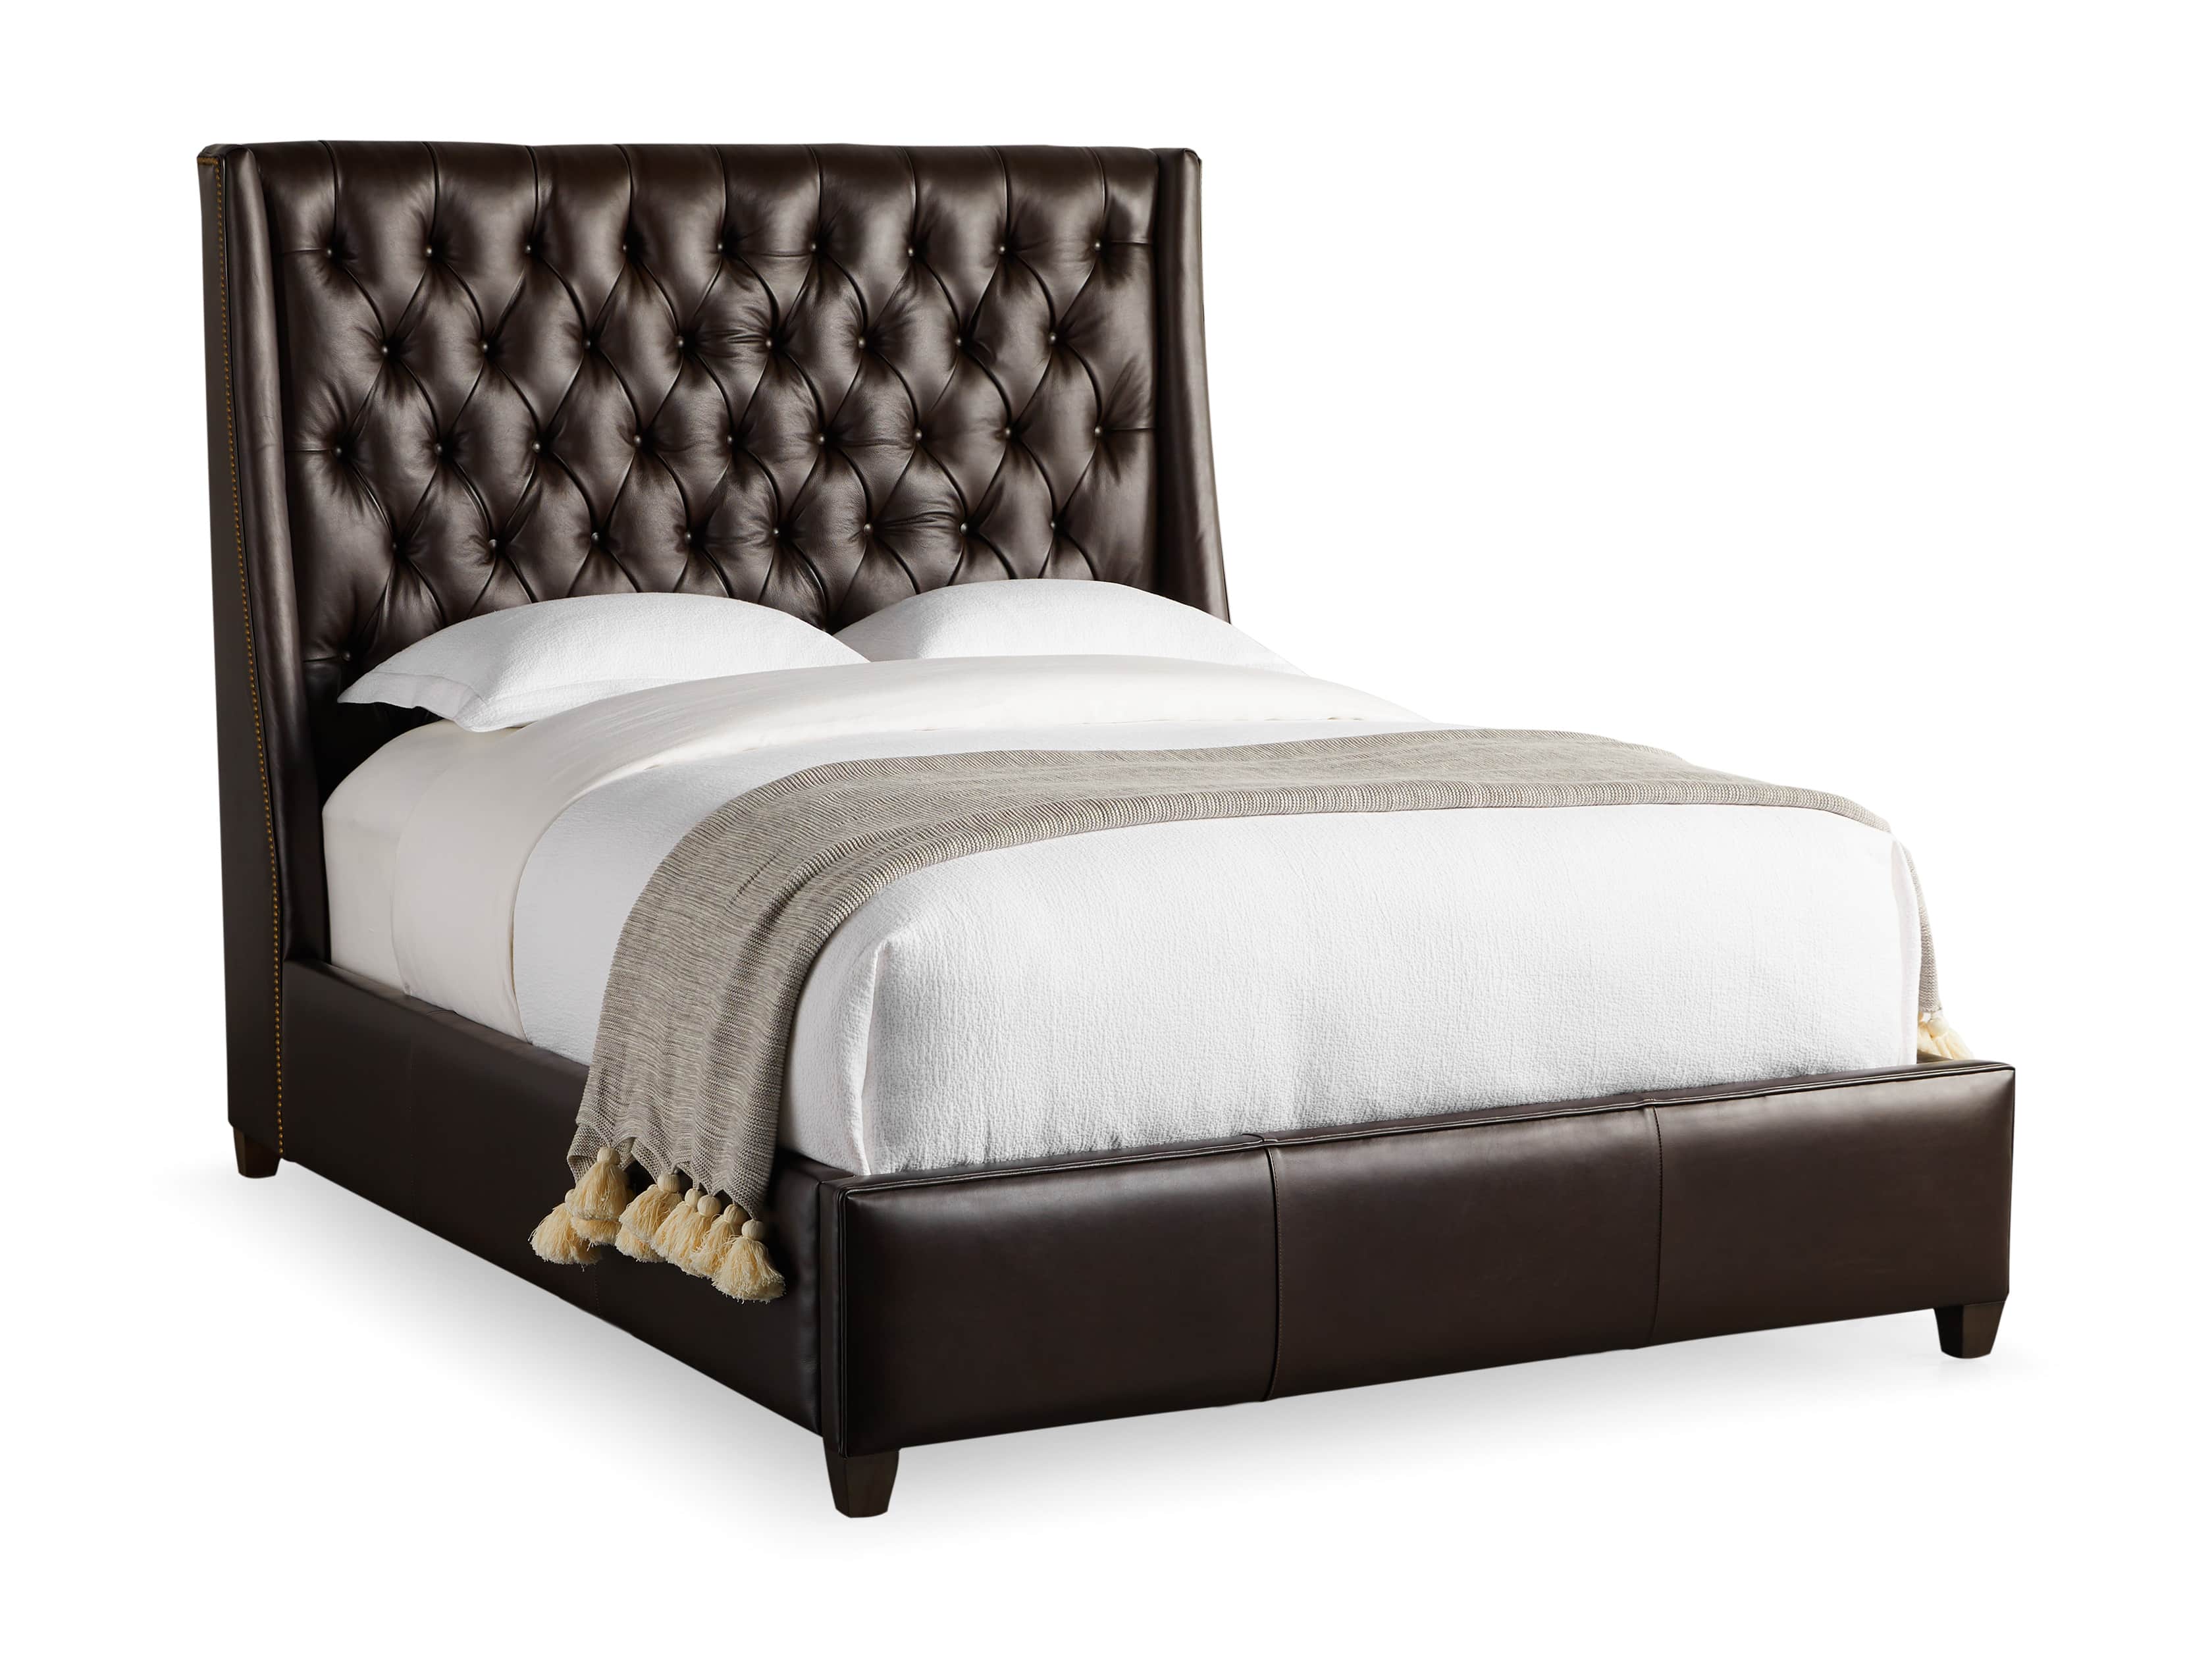 Devereaux Leather Tufted Bed Arhaus, Tufted Leather Headboard King